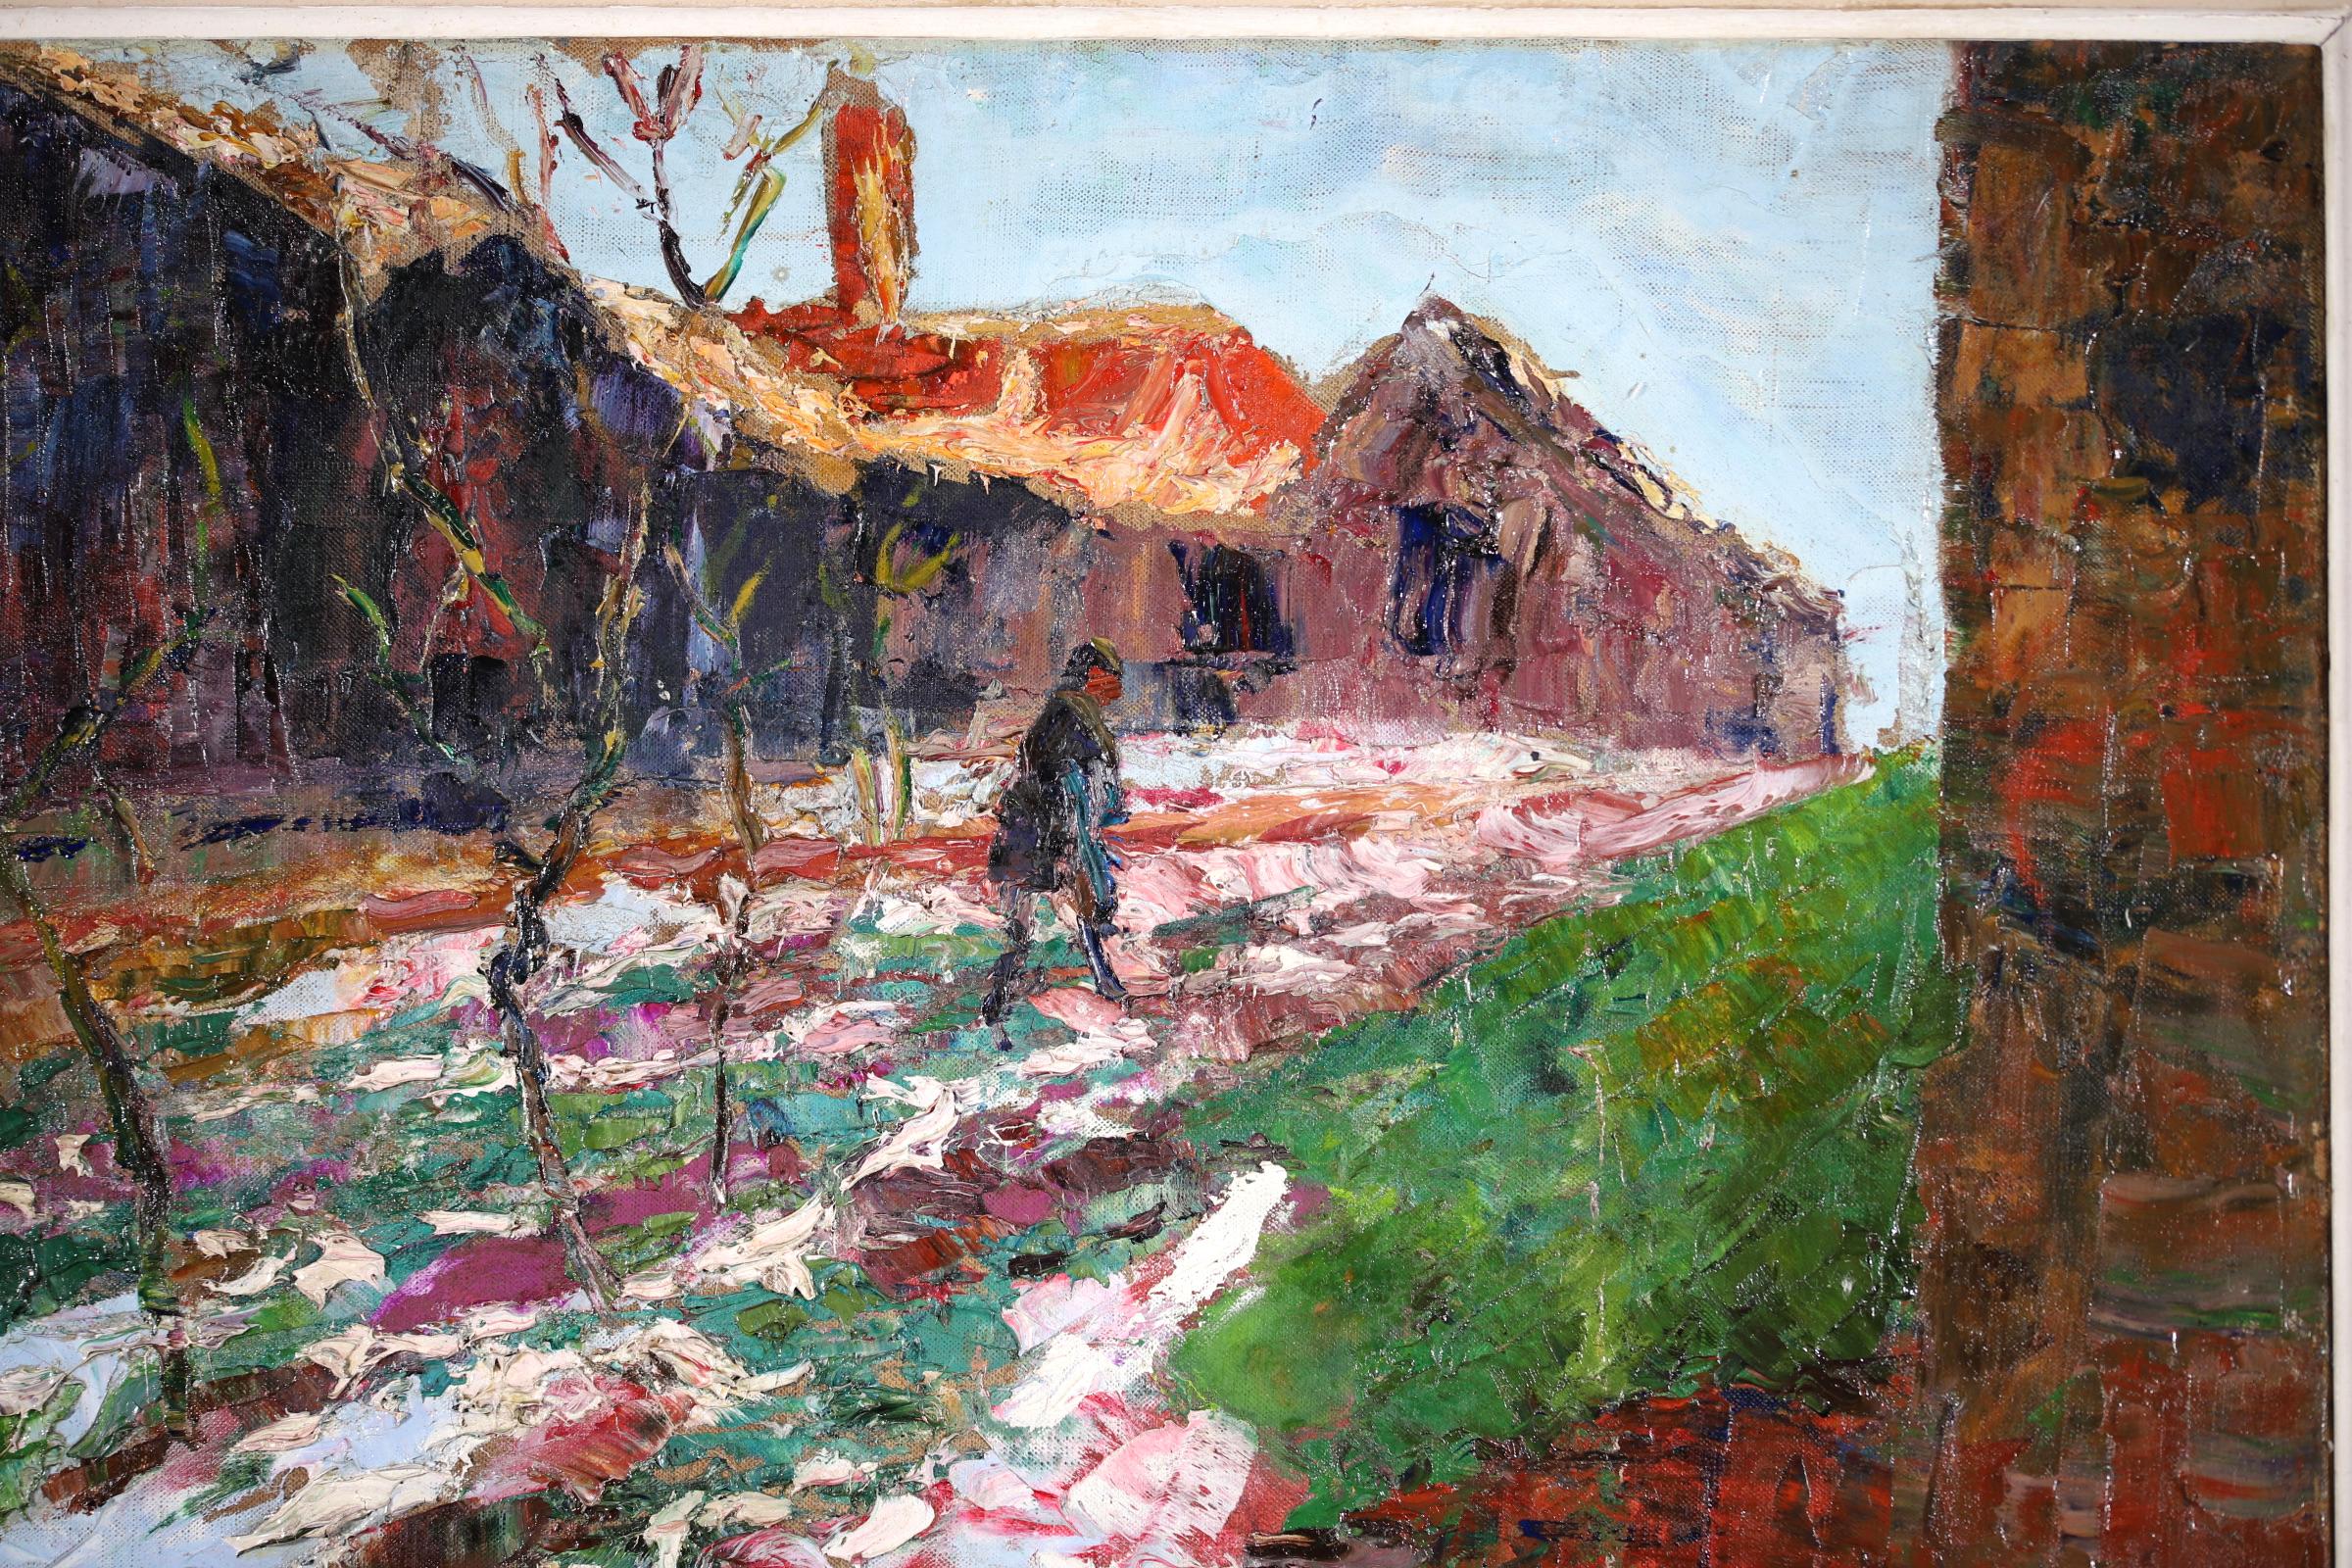 Large signed landscape oil on canvas circa 1920 by sought after French post impressionist painter Victor Charreton, who was known as the painter of colours. The work depicts a woman walking through a snowy village in winter. The piece is beautifully